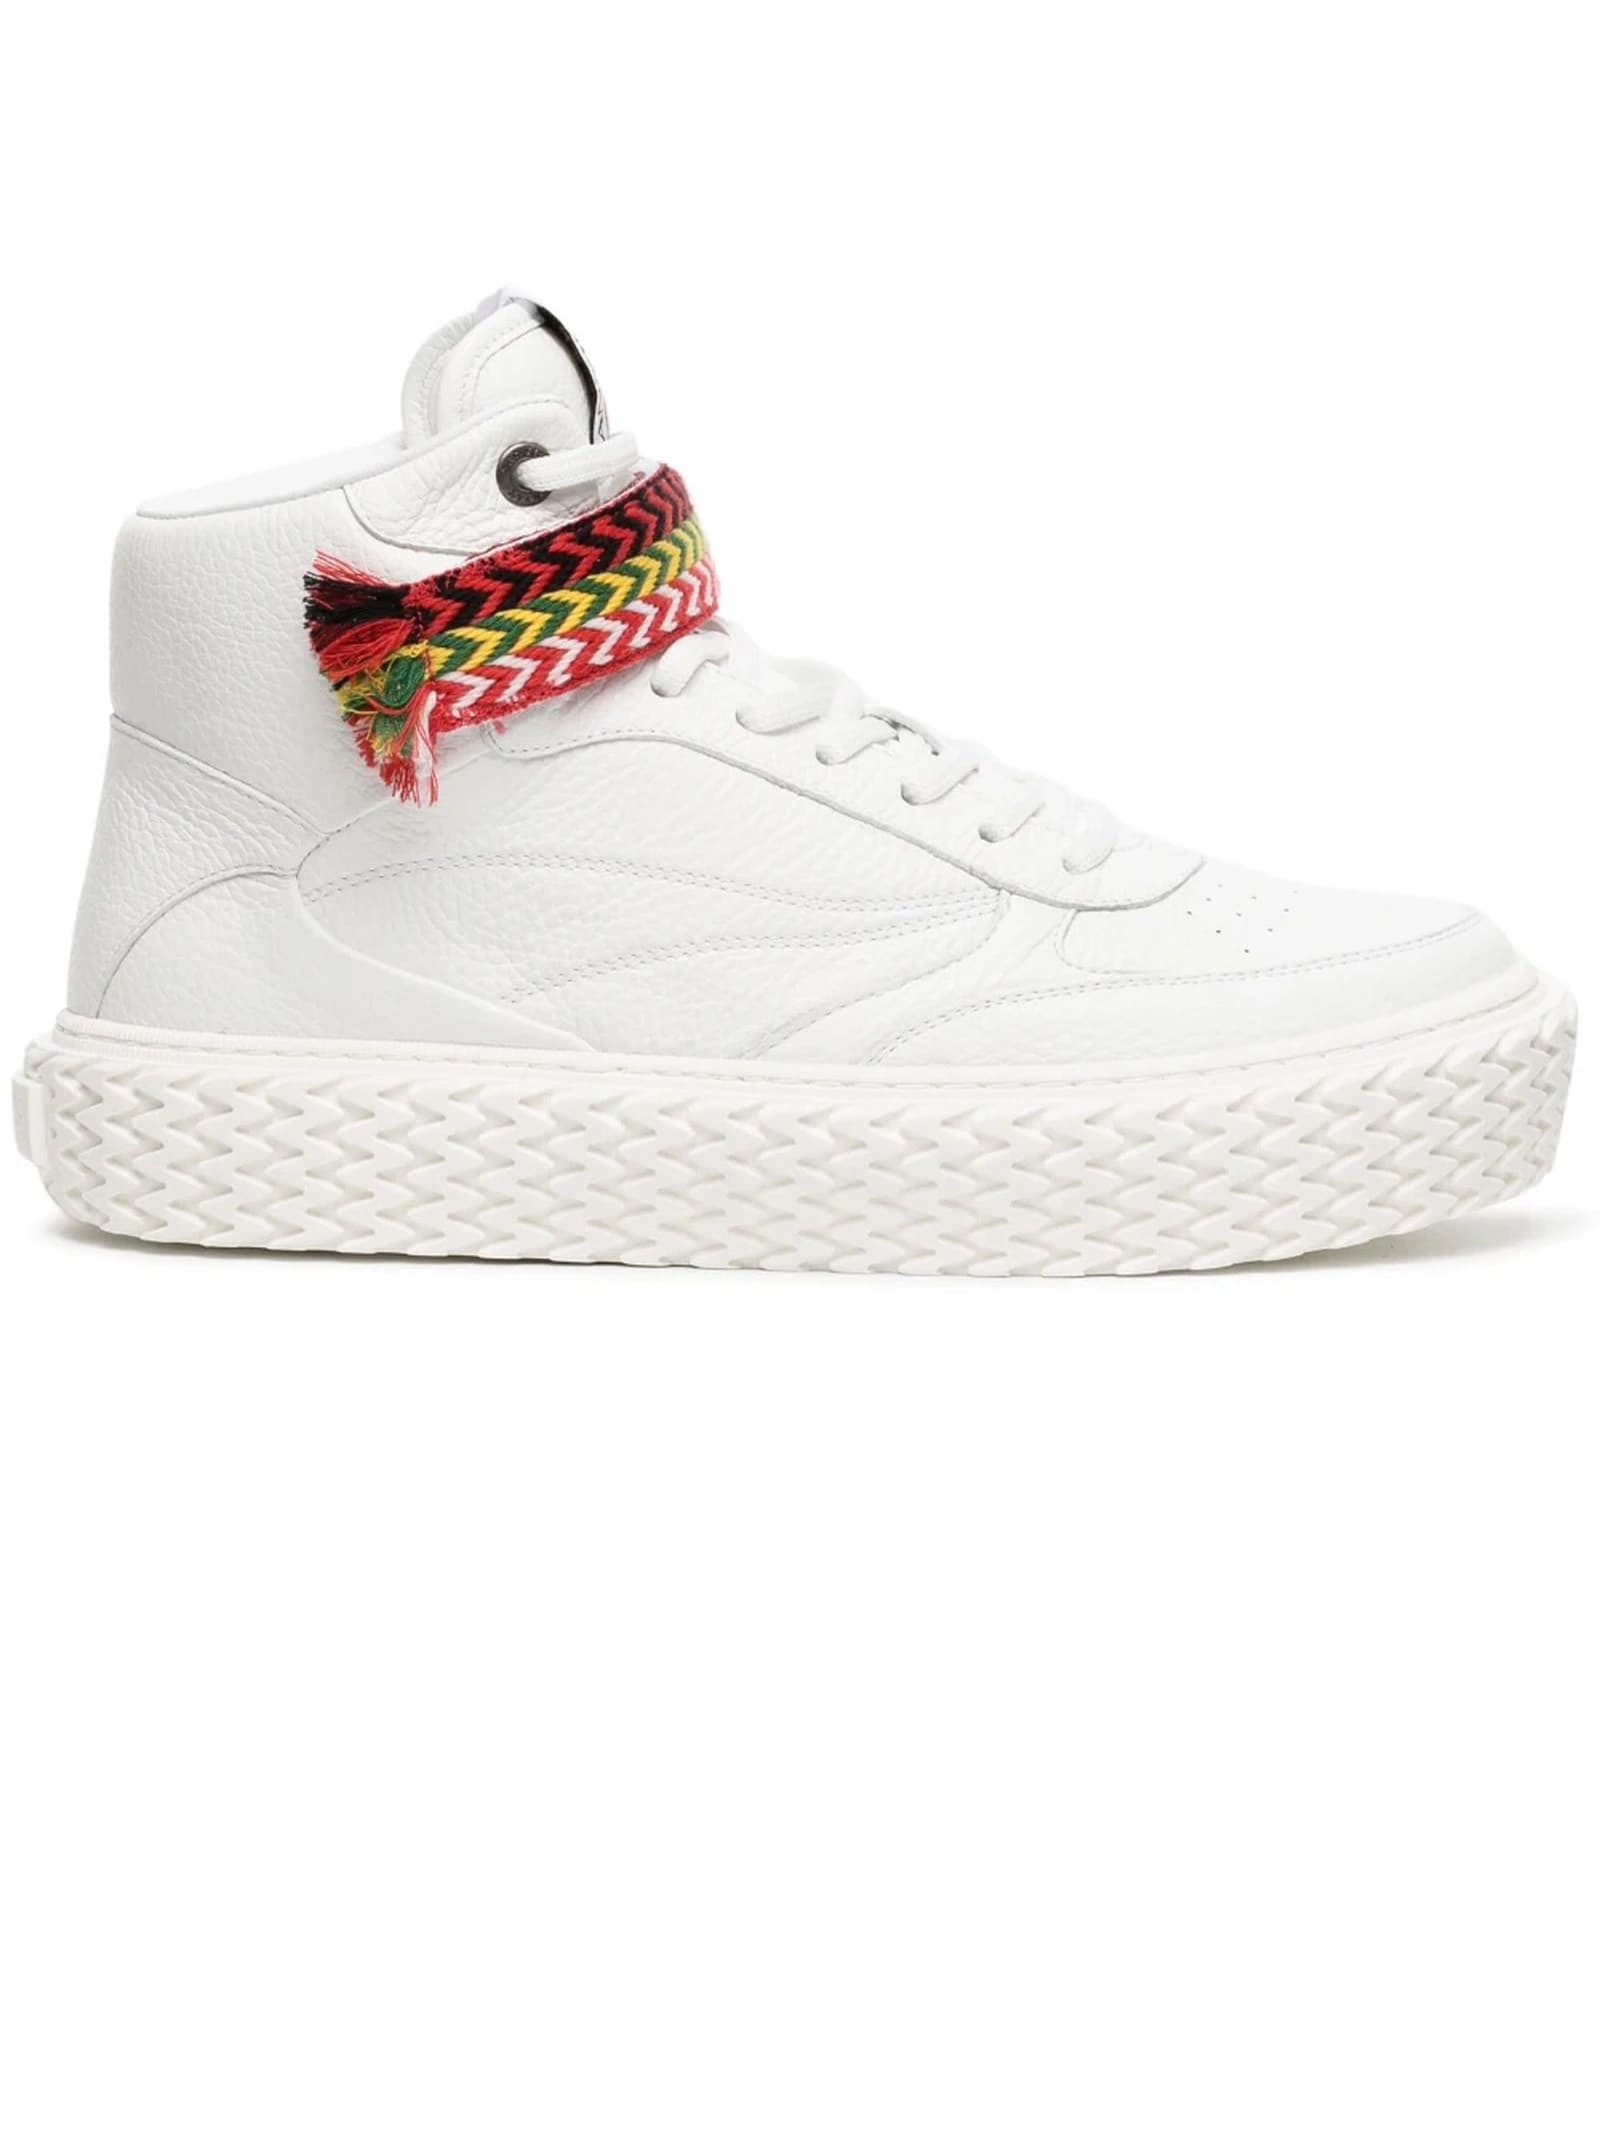 LANVIN WHITE HIGH-TOP LEATHER SNEAKERS